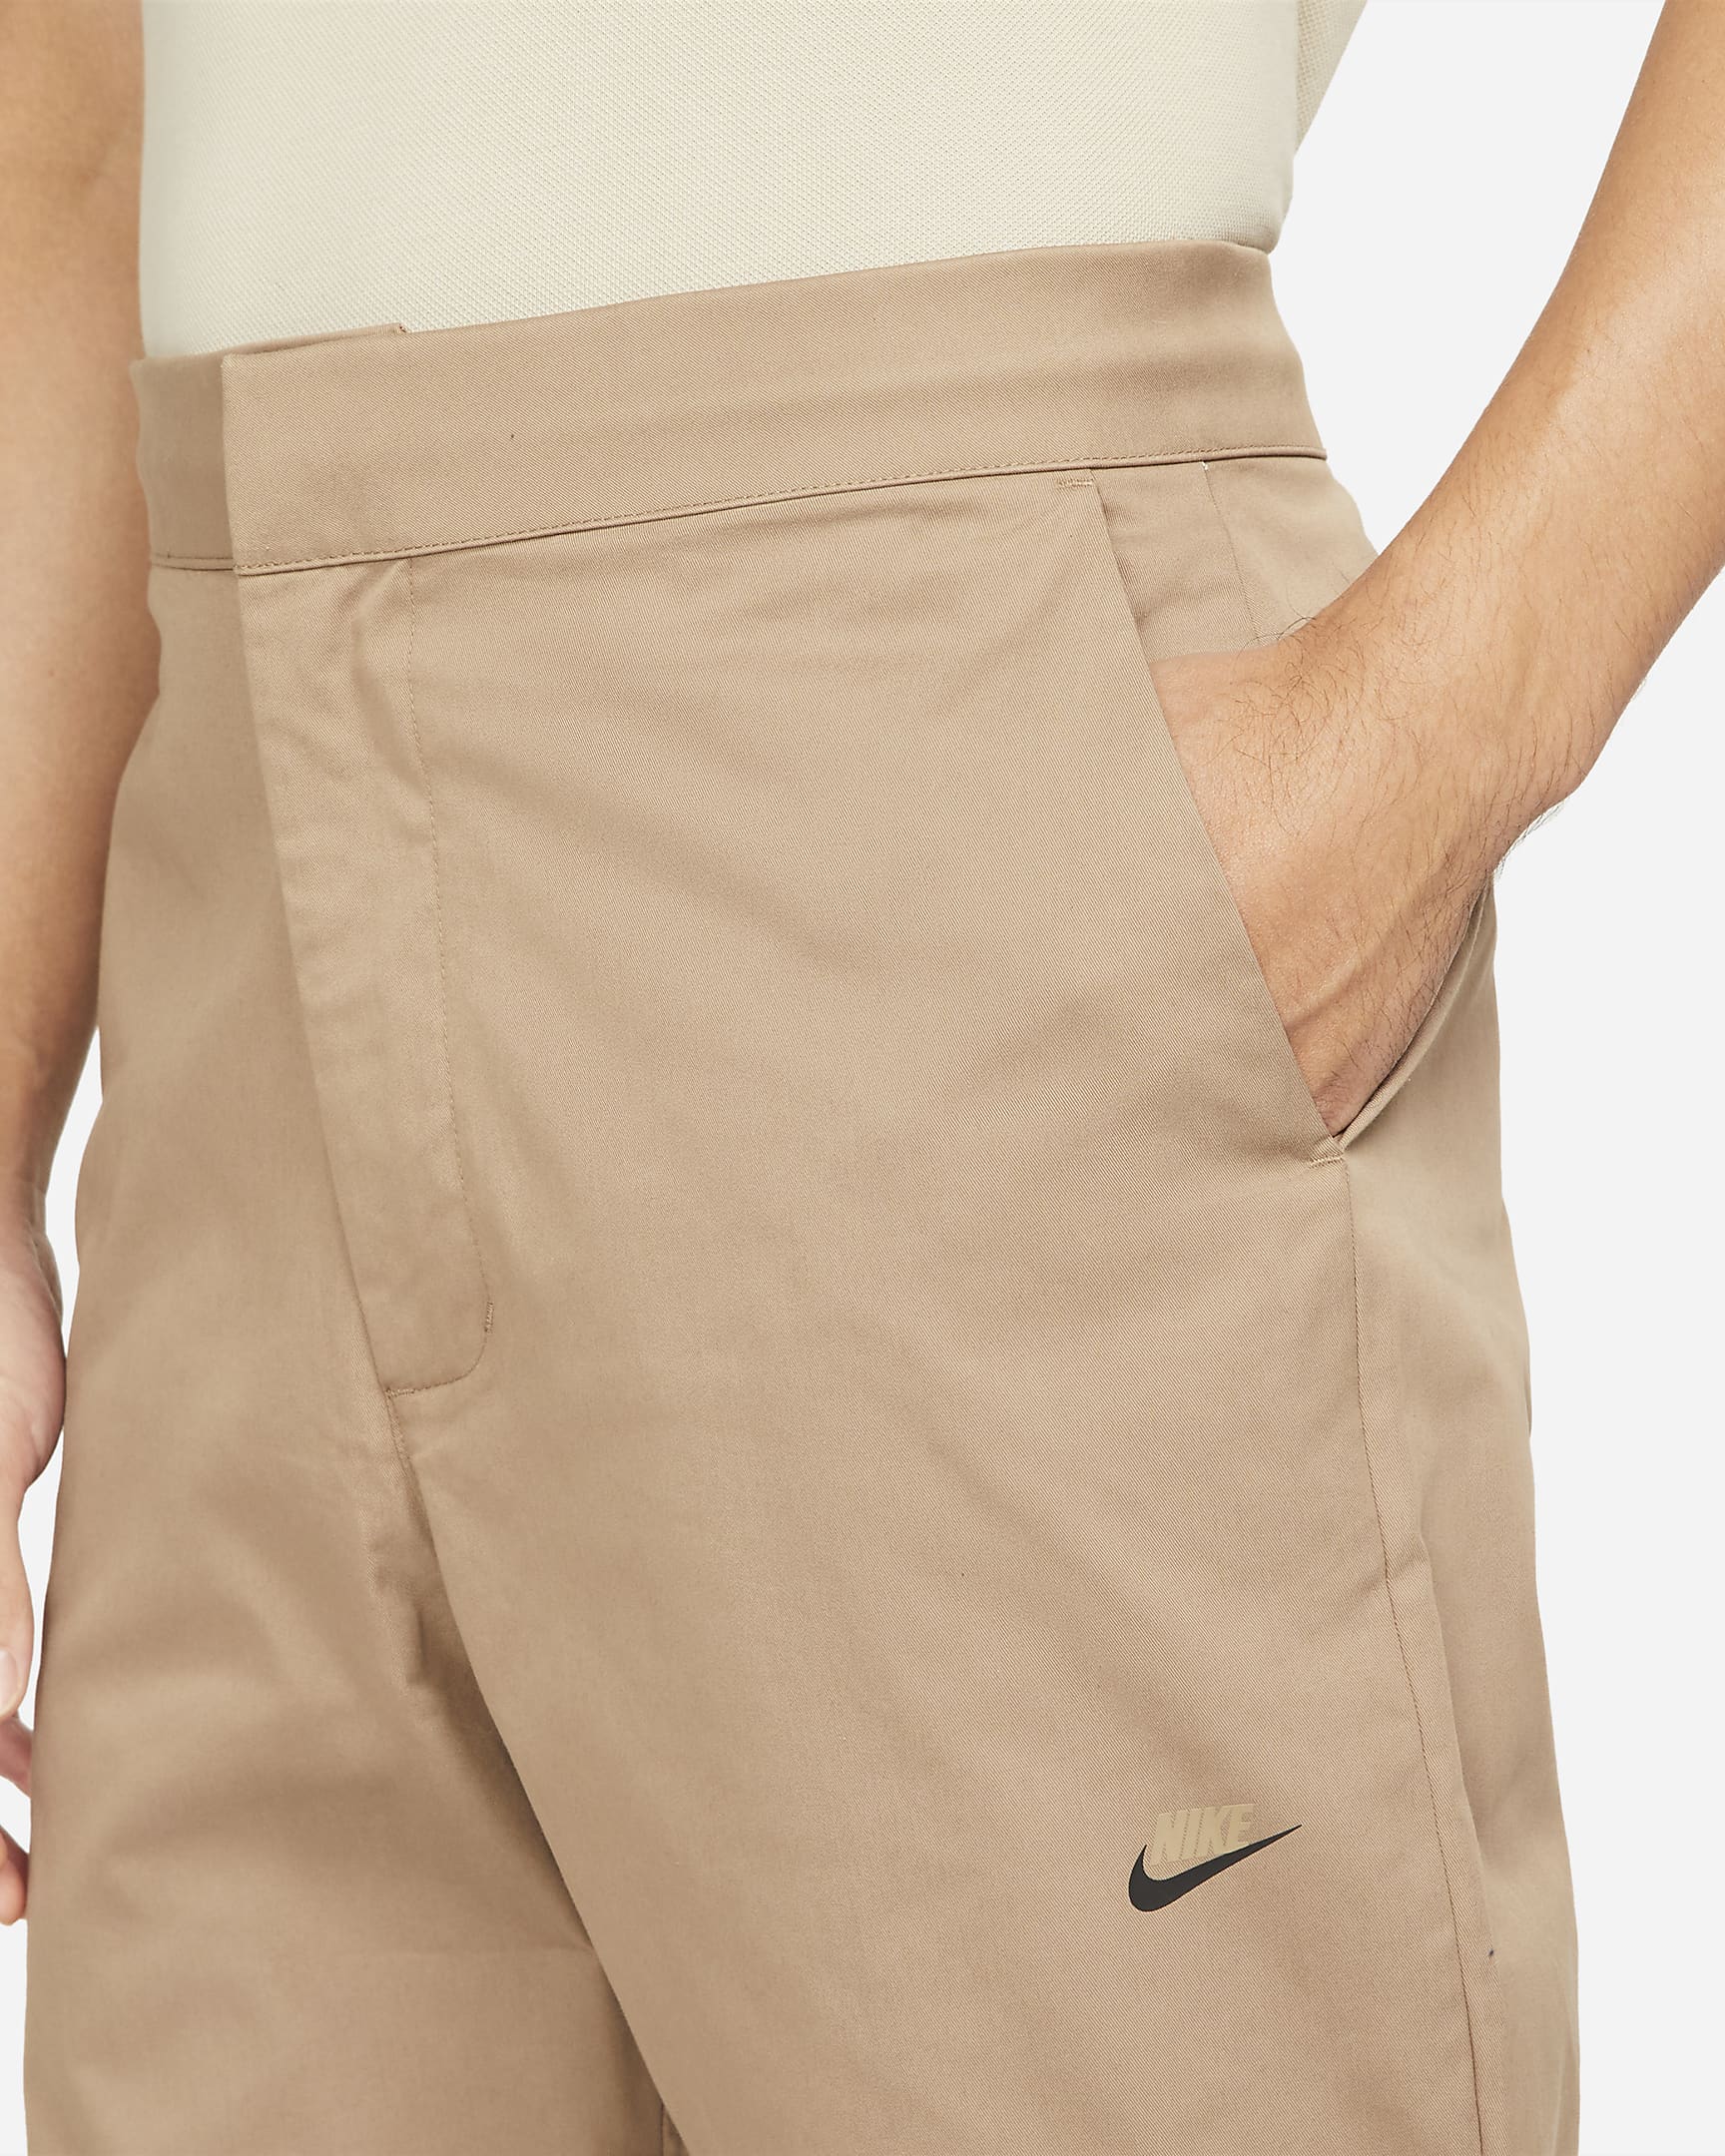 nike-sportswear-style-essentials-mens-unlined-cropped-pants-tWG7Gw-1.png